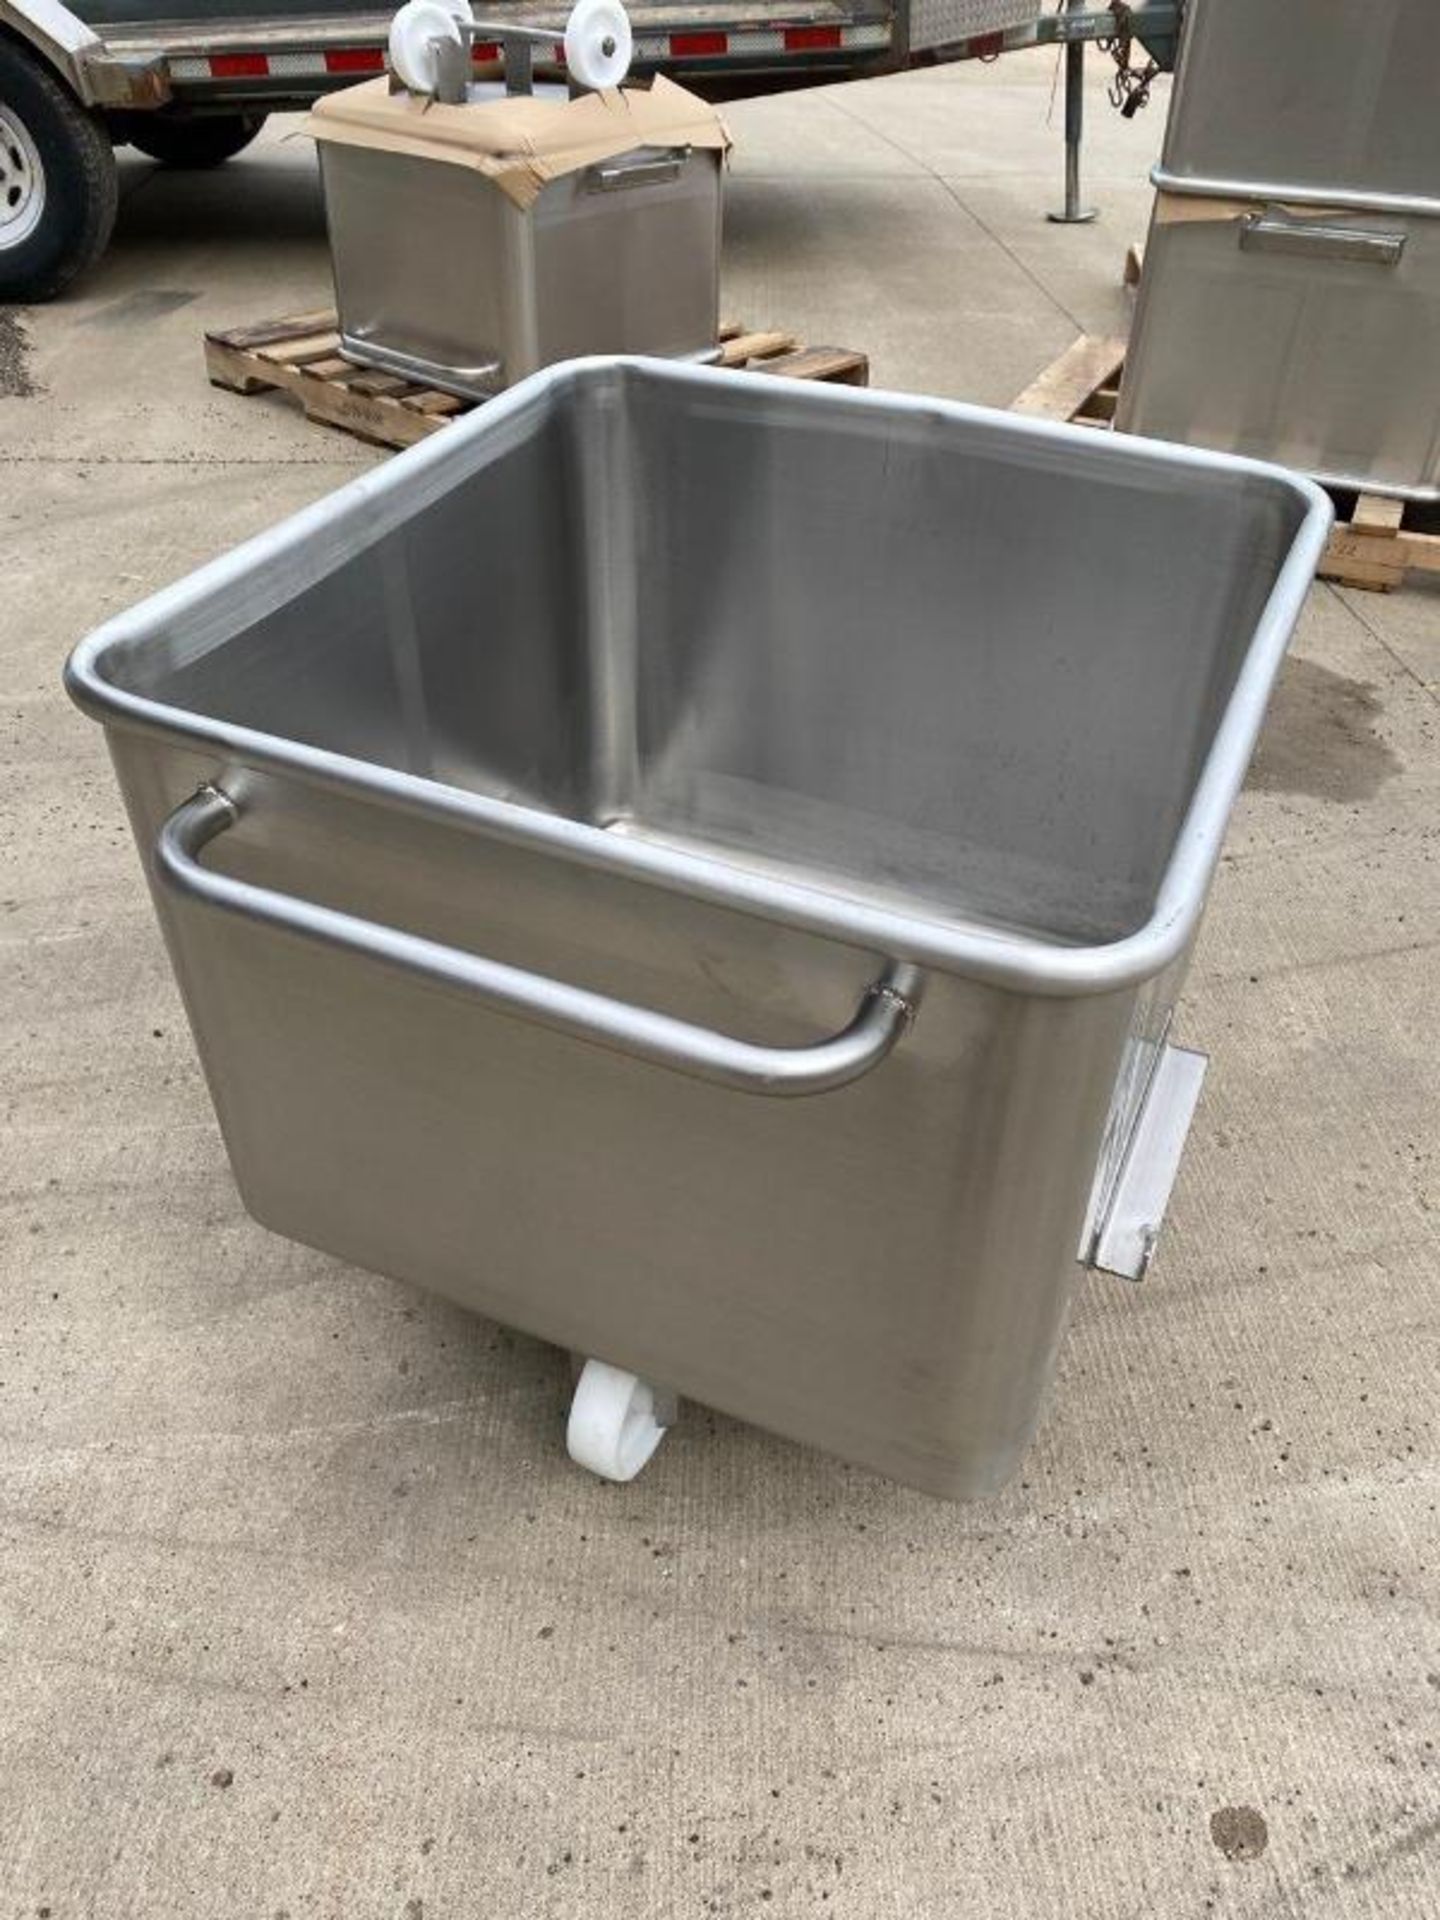 Stainless Steel Dump Buggies, 400 Lb. capacity with handle, new, never used, Located in Sandwich, IL - Image 2 of 4